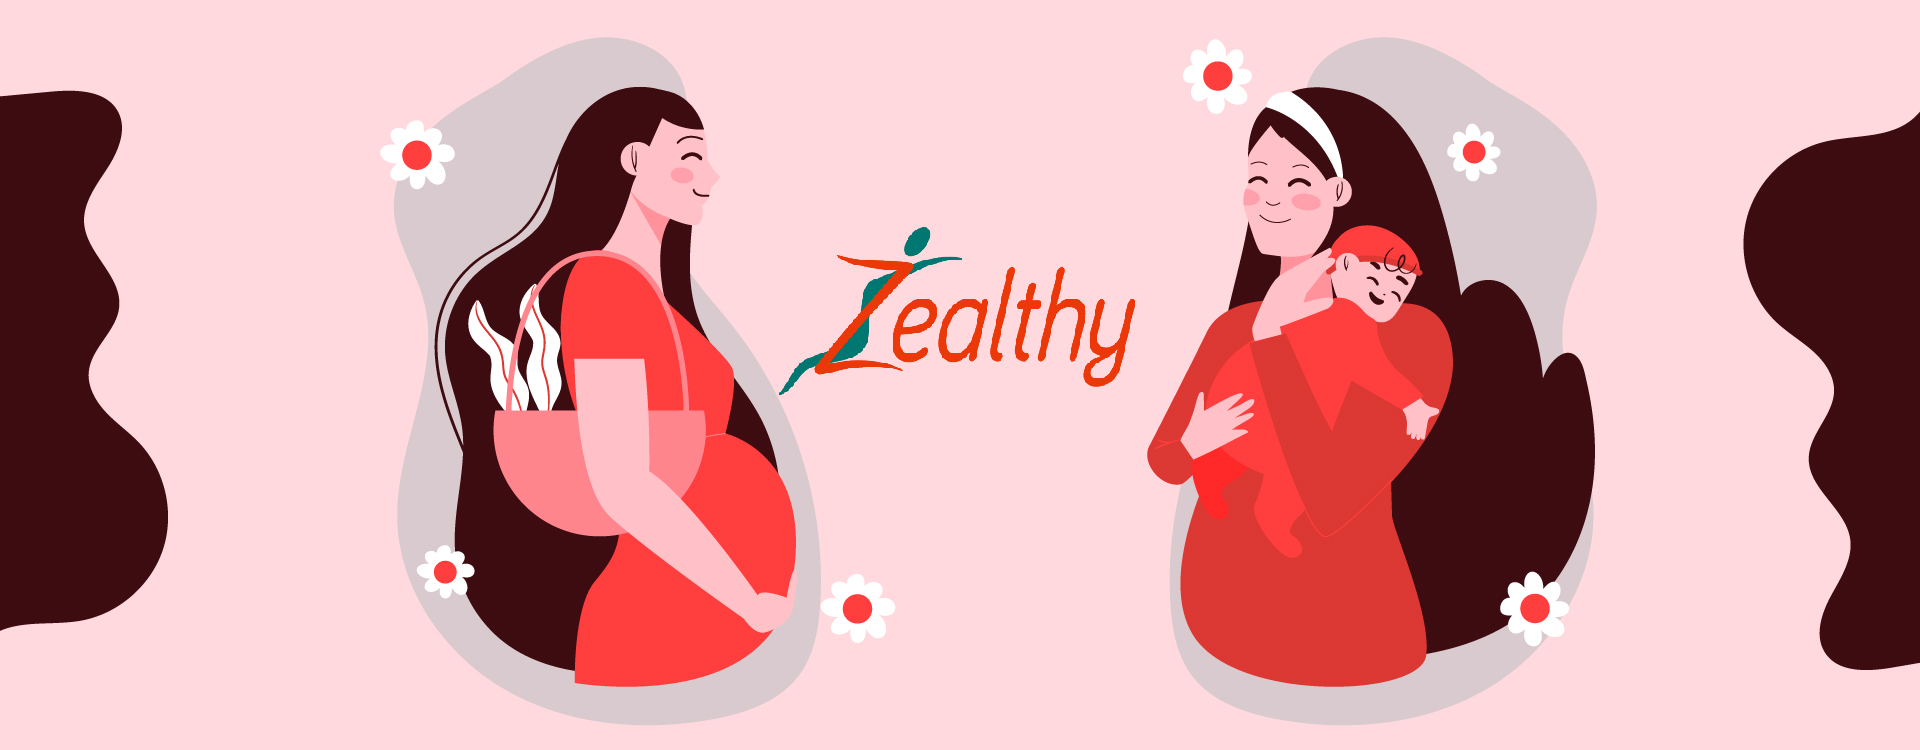 Zealthy is a one stop healthcare startups that caters to female reproductive health.